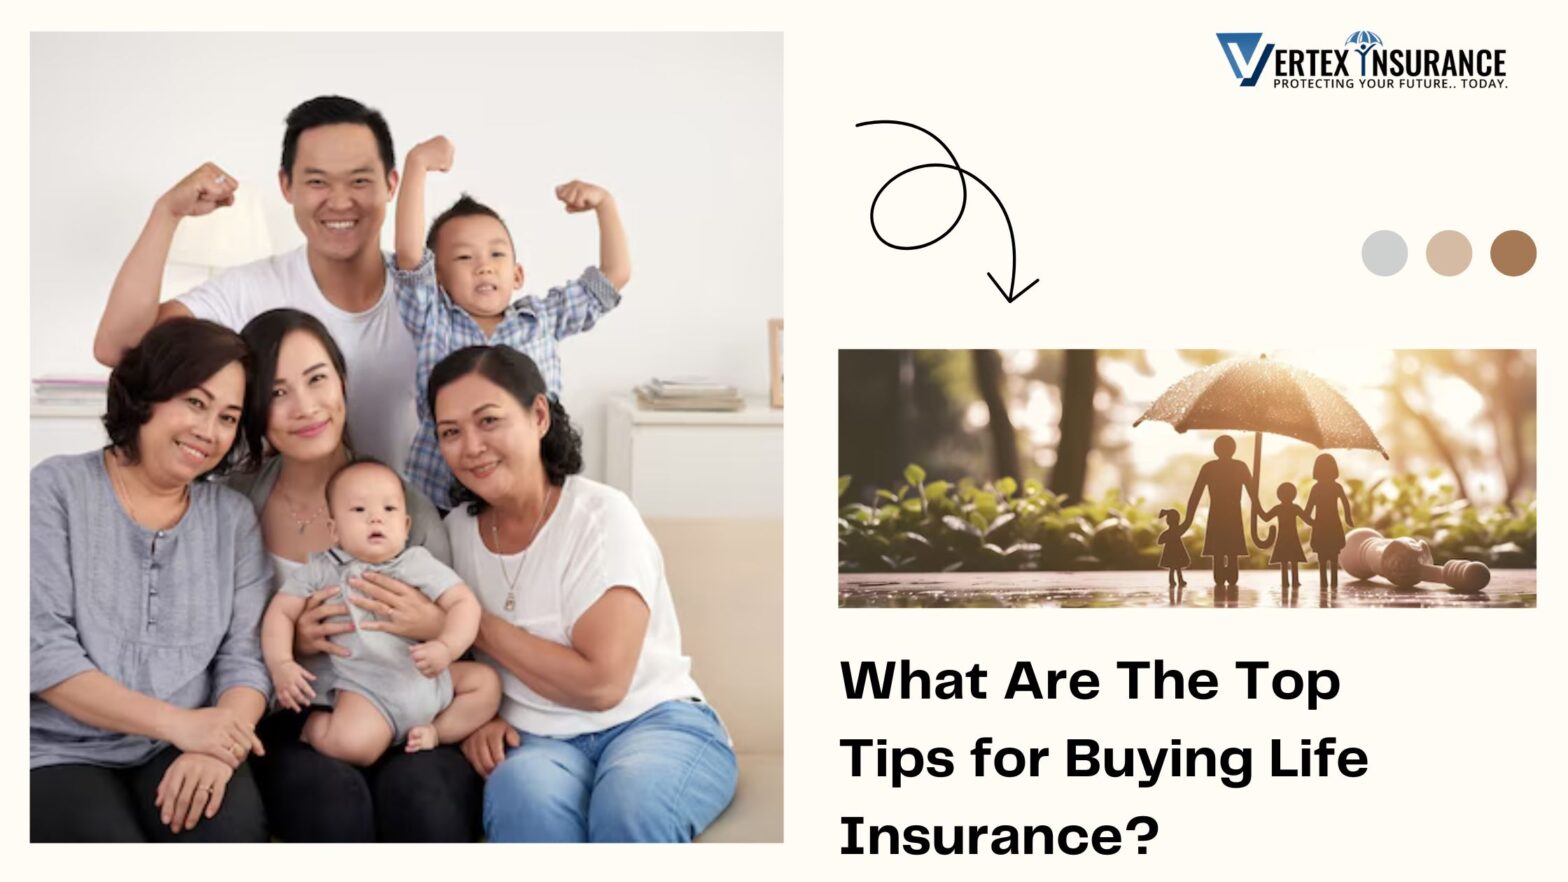 What Are The Top Tips for Buying Life Insurance